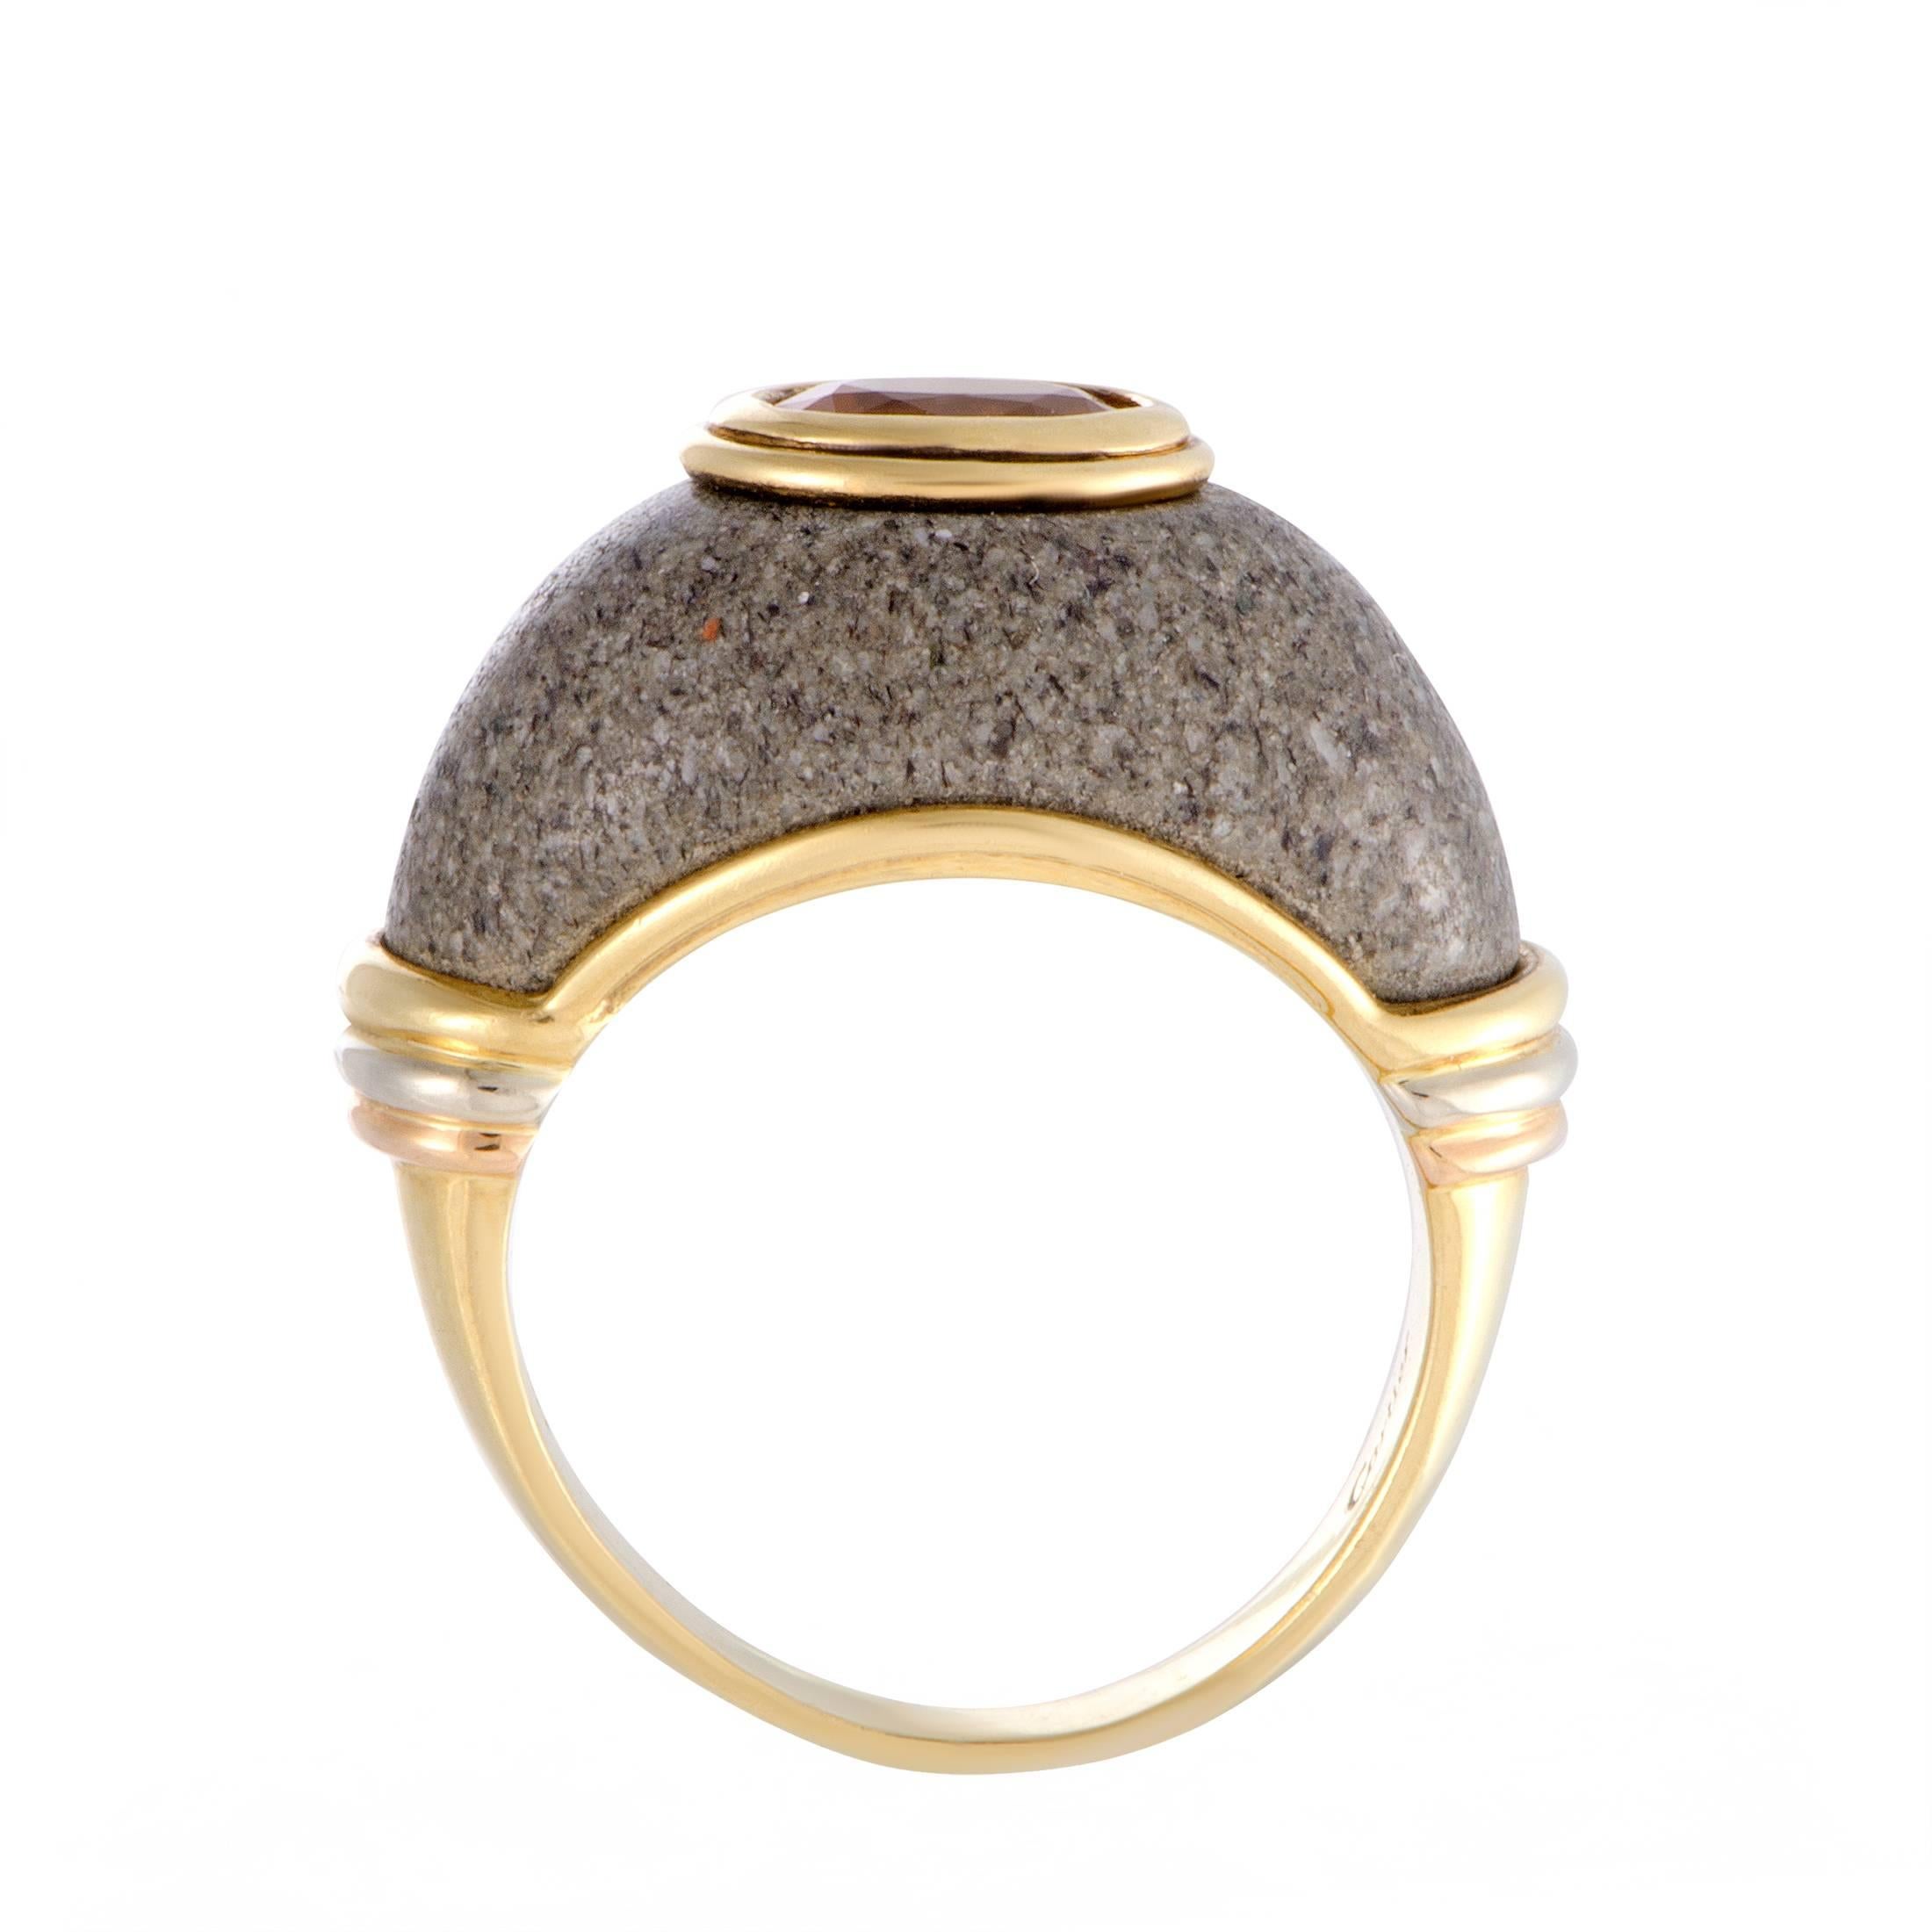 The warm tones of 18K yellow gold and citrine are niftily tempered by gray jade in this exceptional Cartier ring that offers a splendidly luxurious, fashionable appearance.
Included Items: Manufacturer's Box
Ring Size: 6
Band Thickness: 3mm
Ring Top